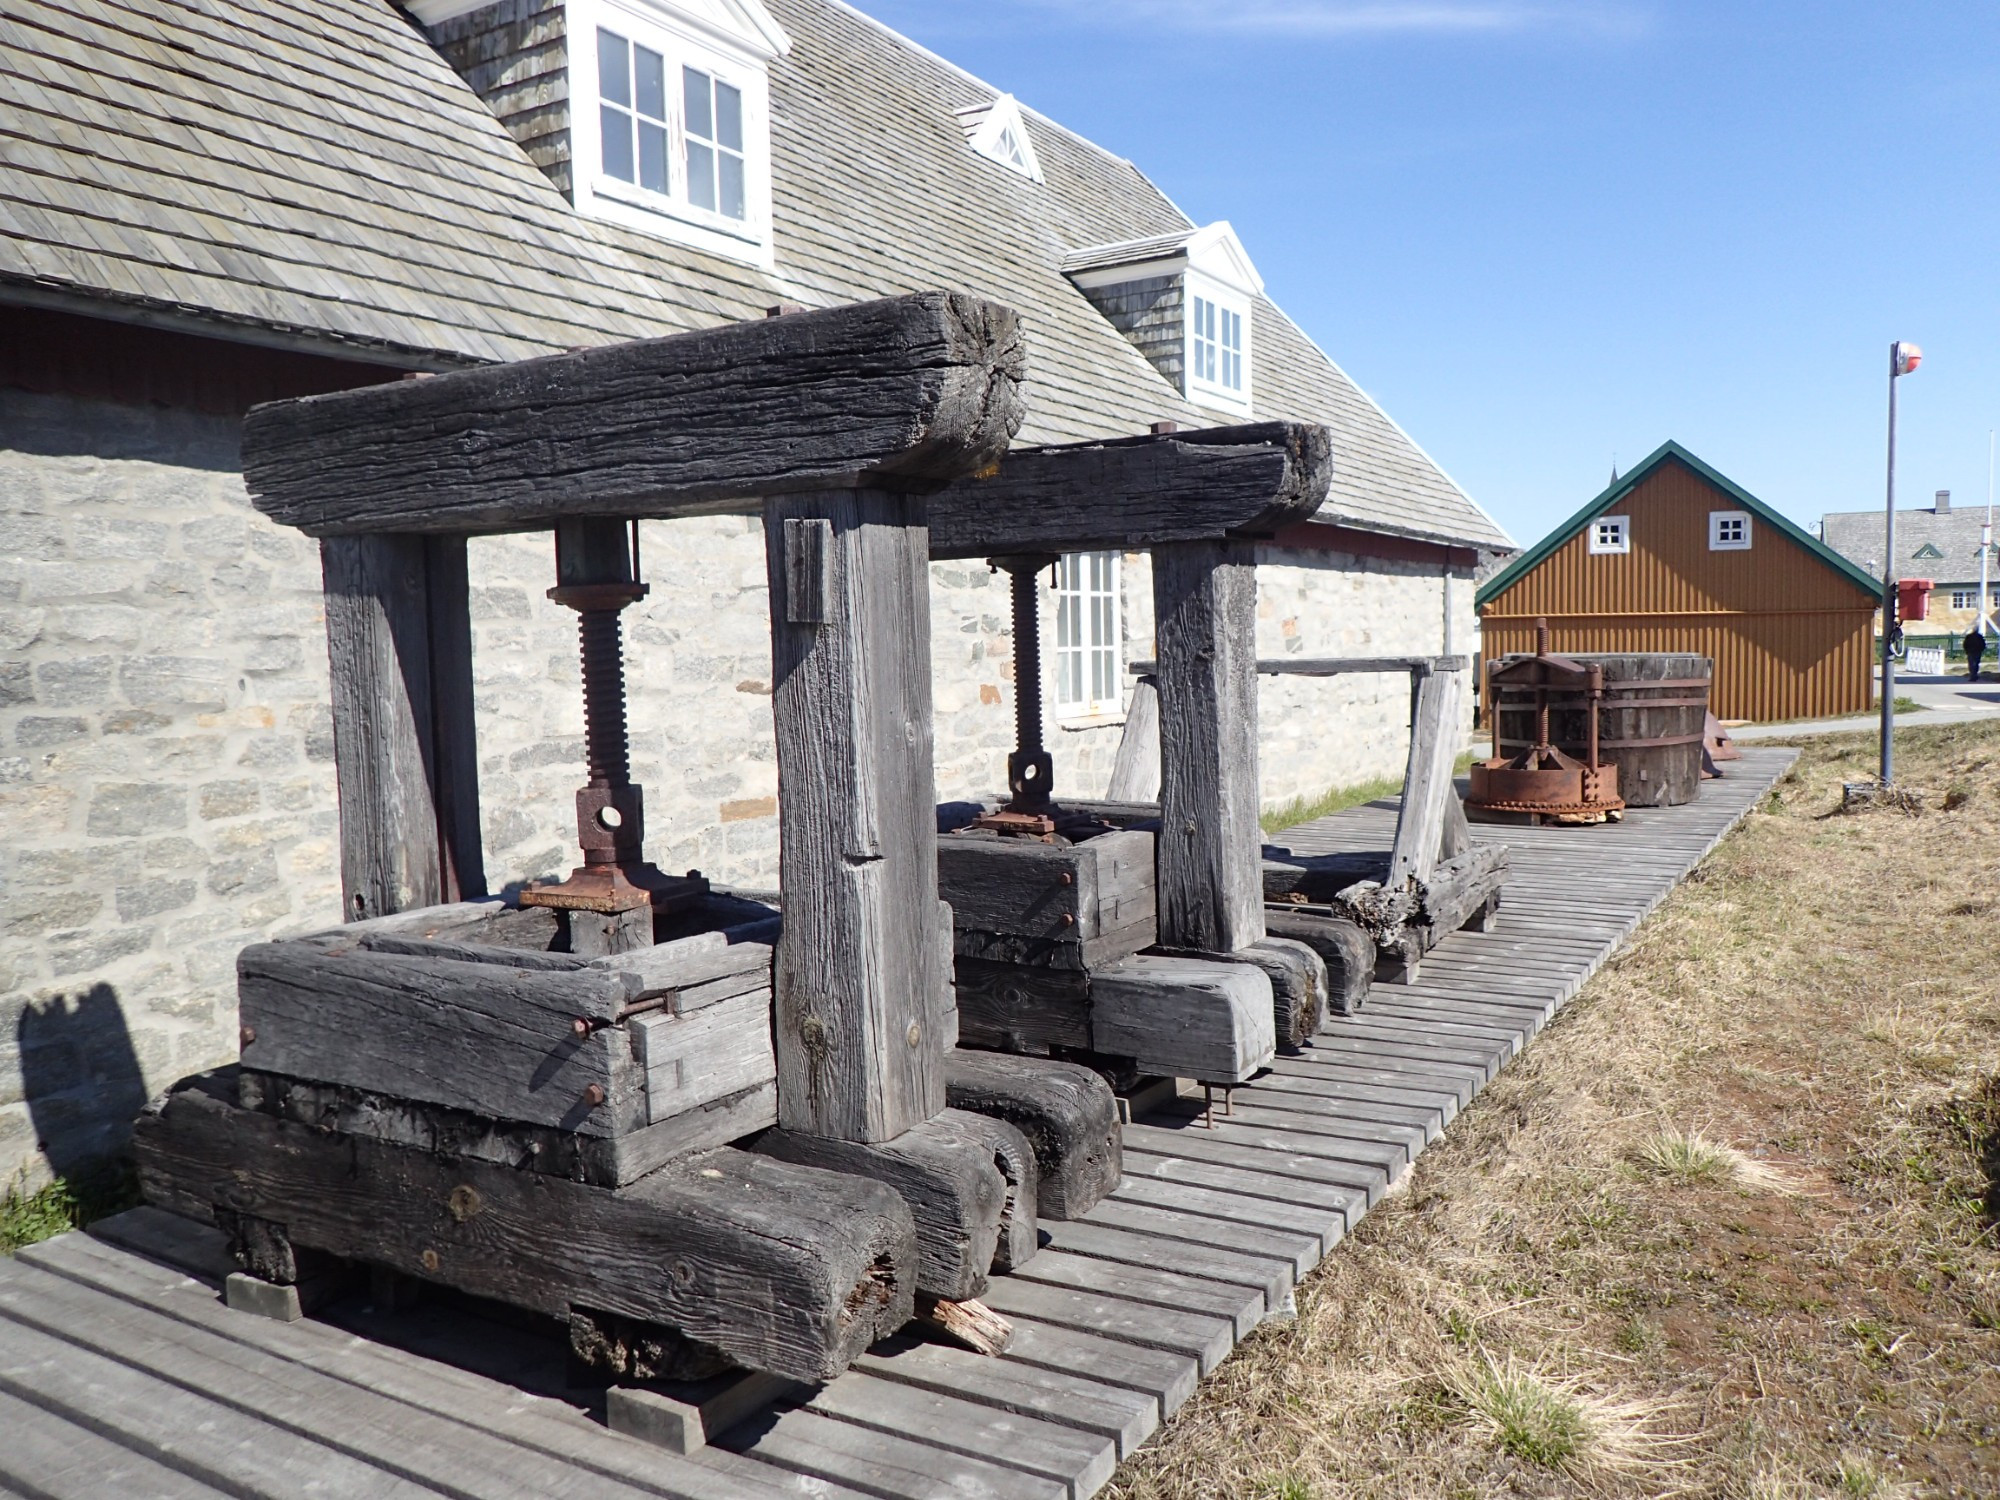 Whaling Oil Production Exhibits, Greenland